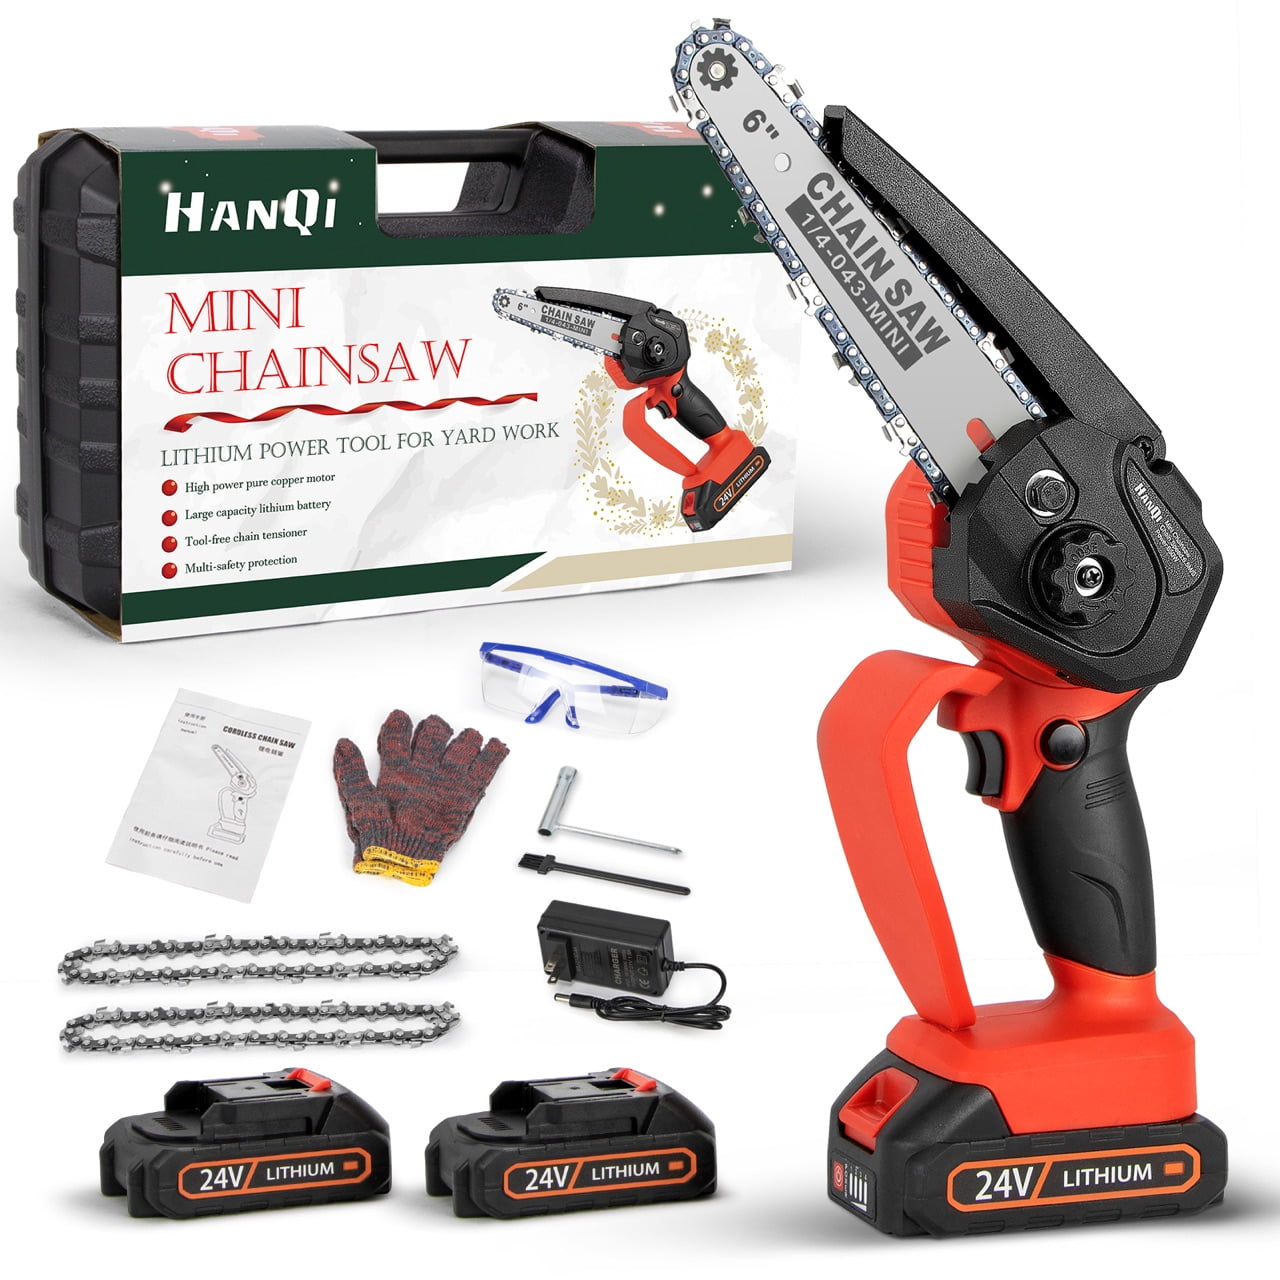 Mini Chainsaw 6-Inch Version 3.0 - with Built-in Chain Adjustment